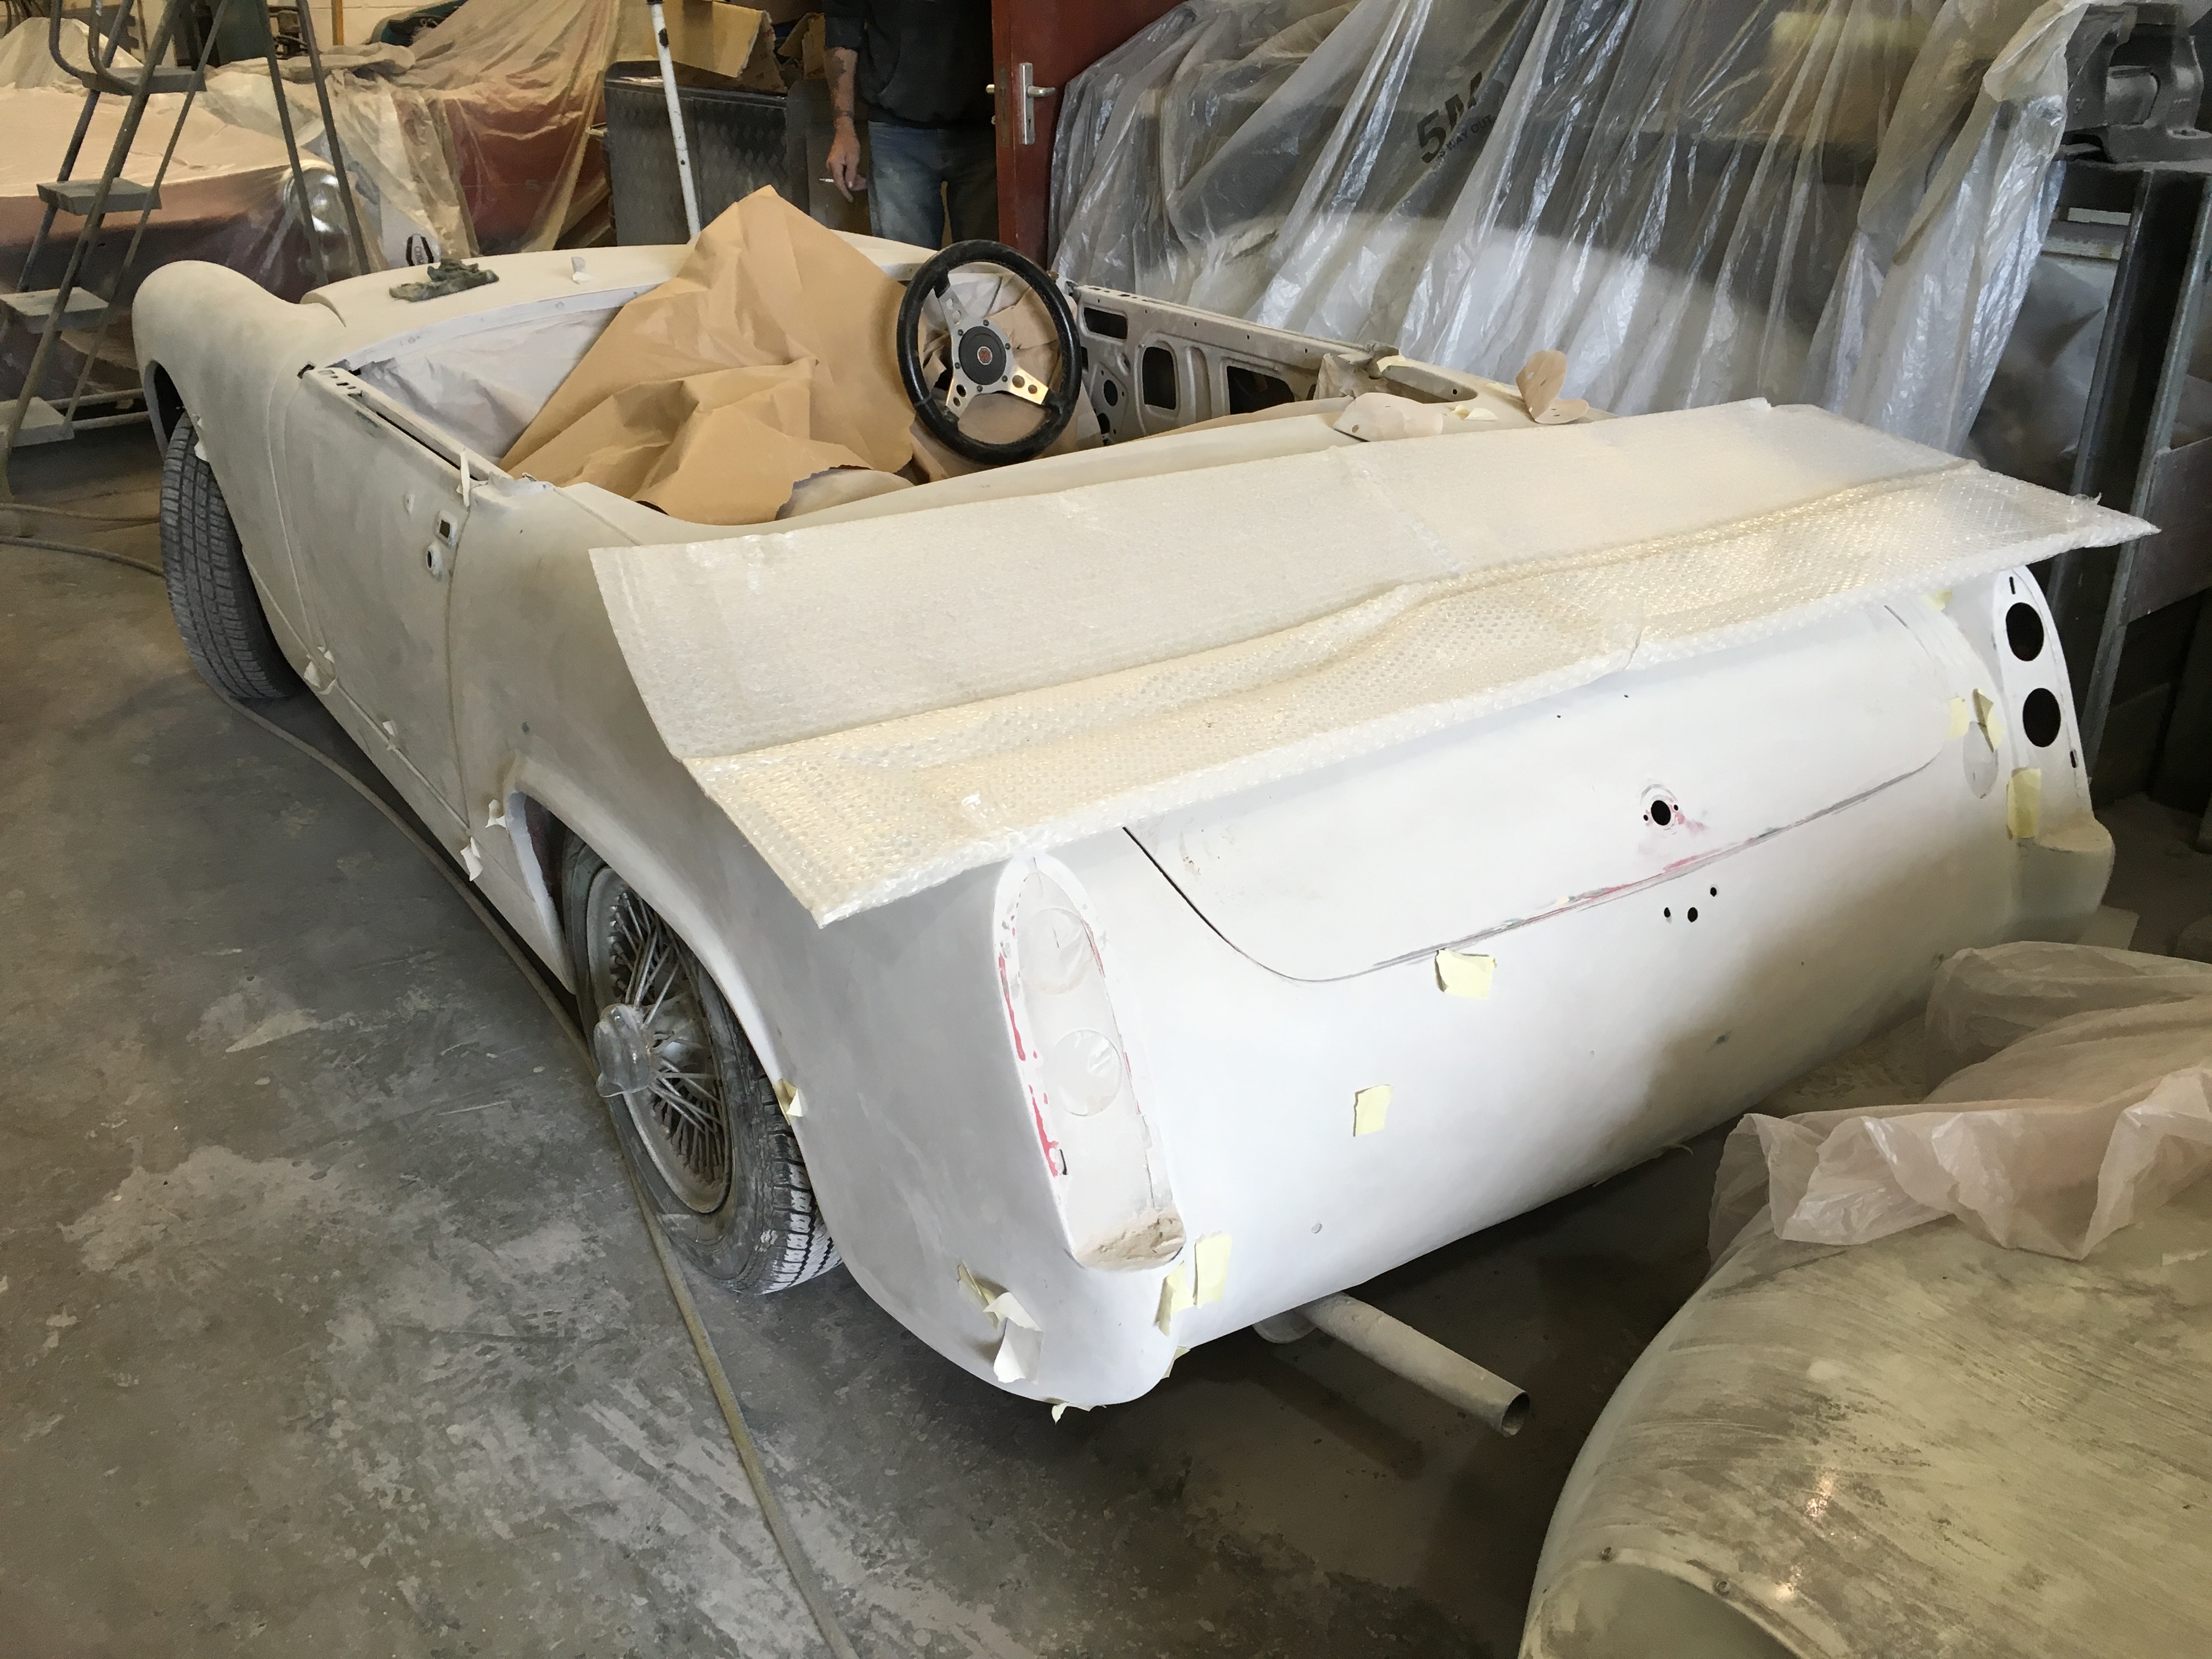 1966 MG Midget Ready For Paint